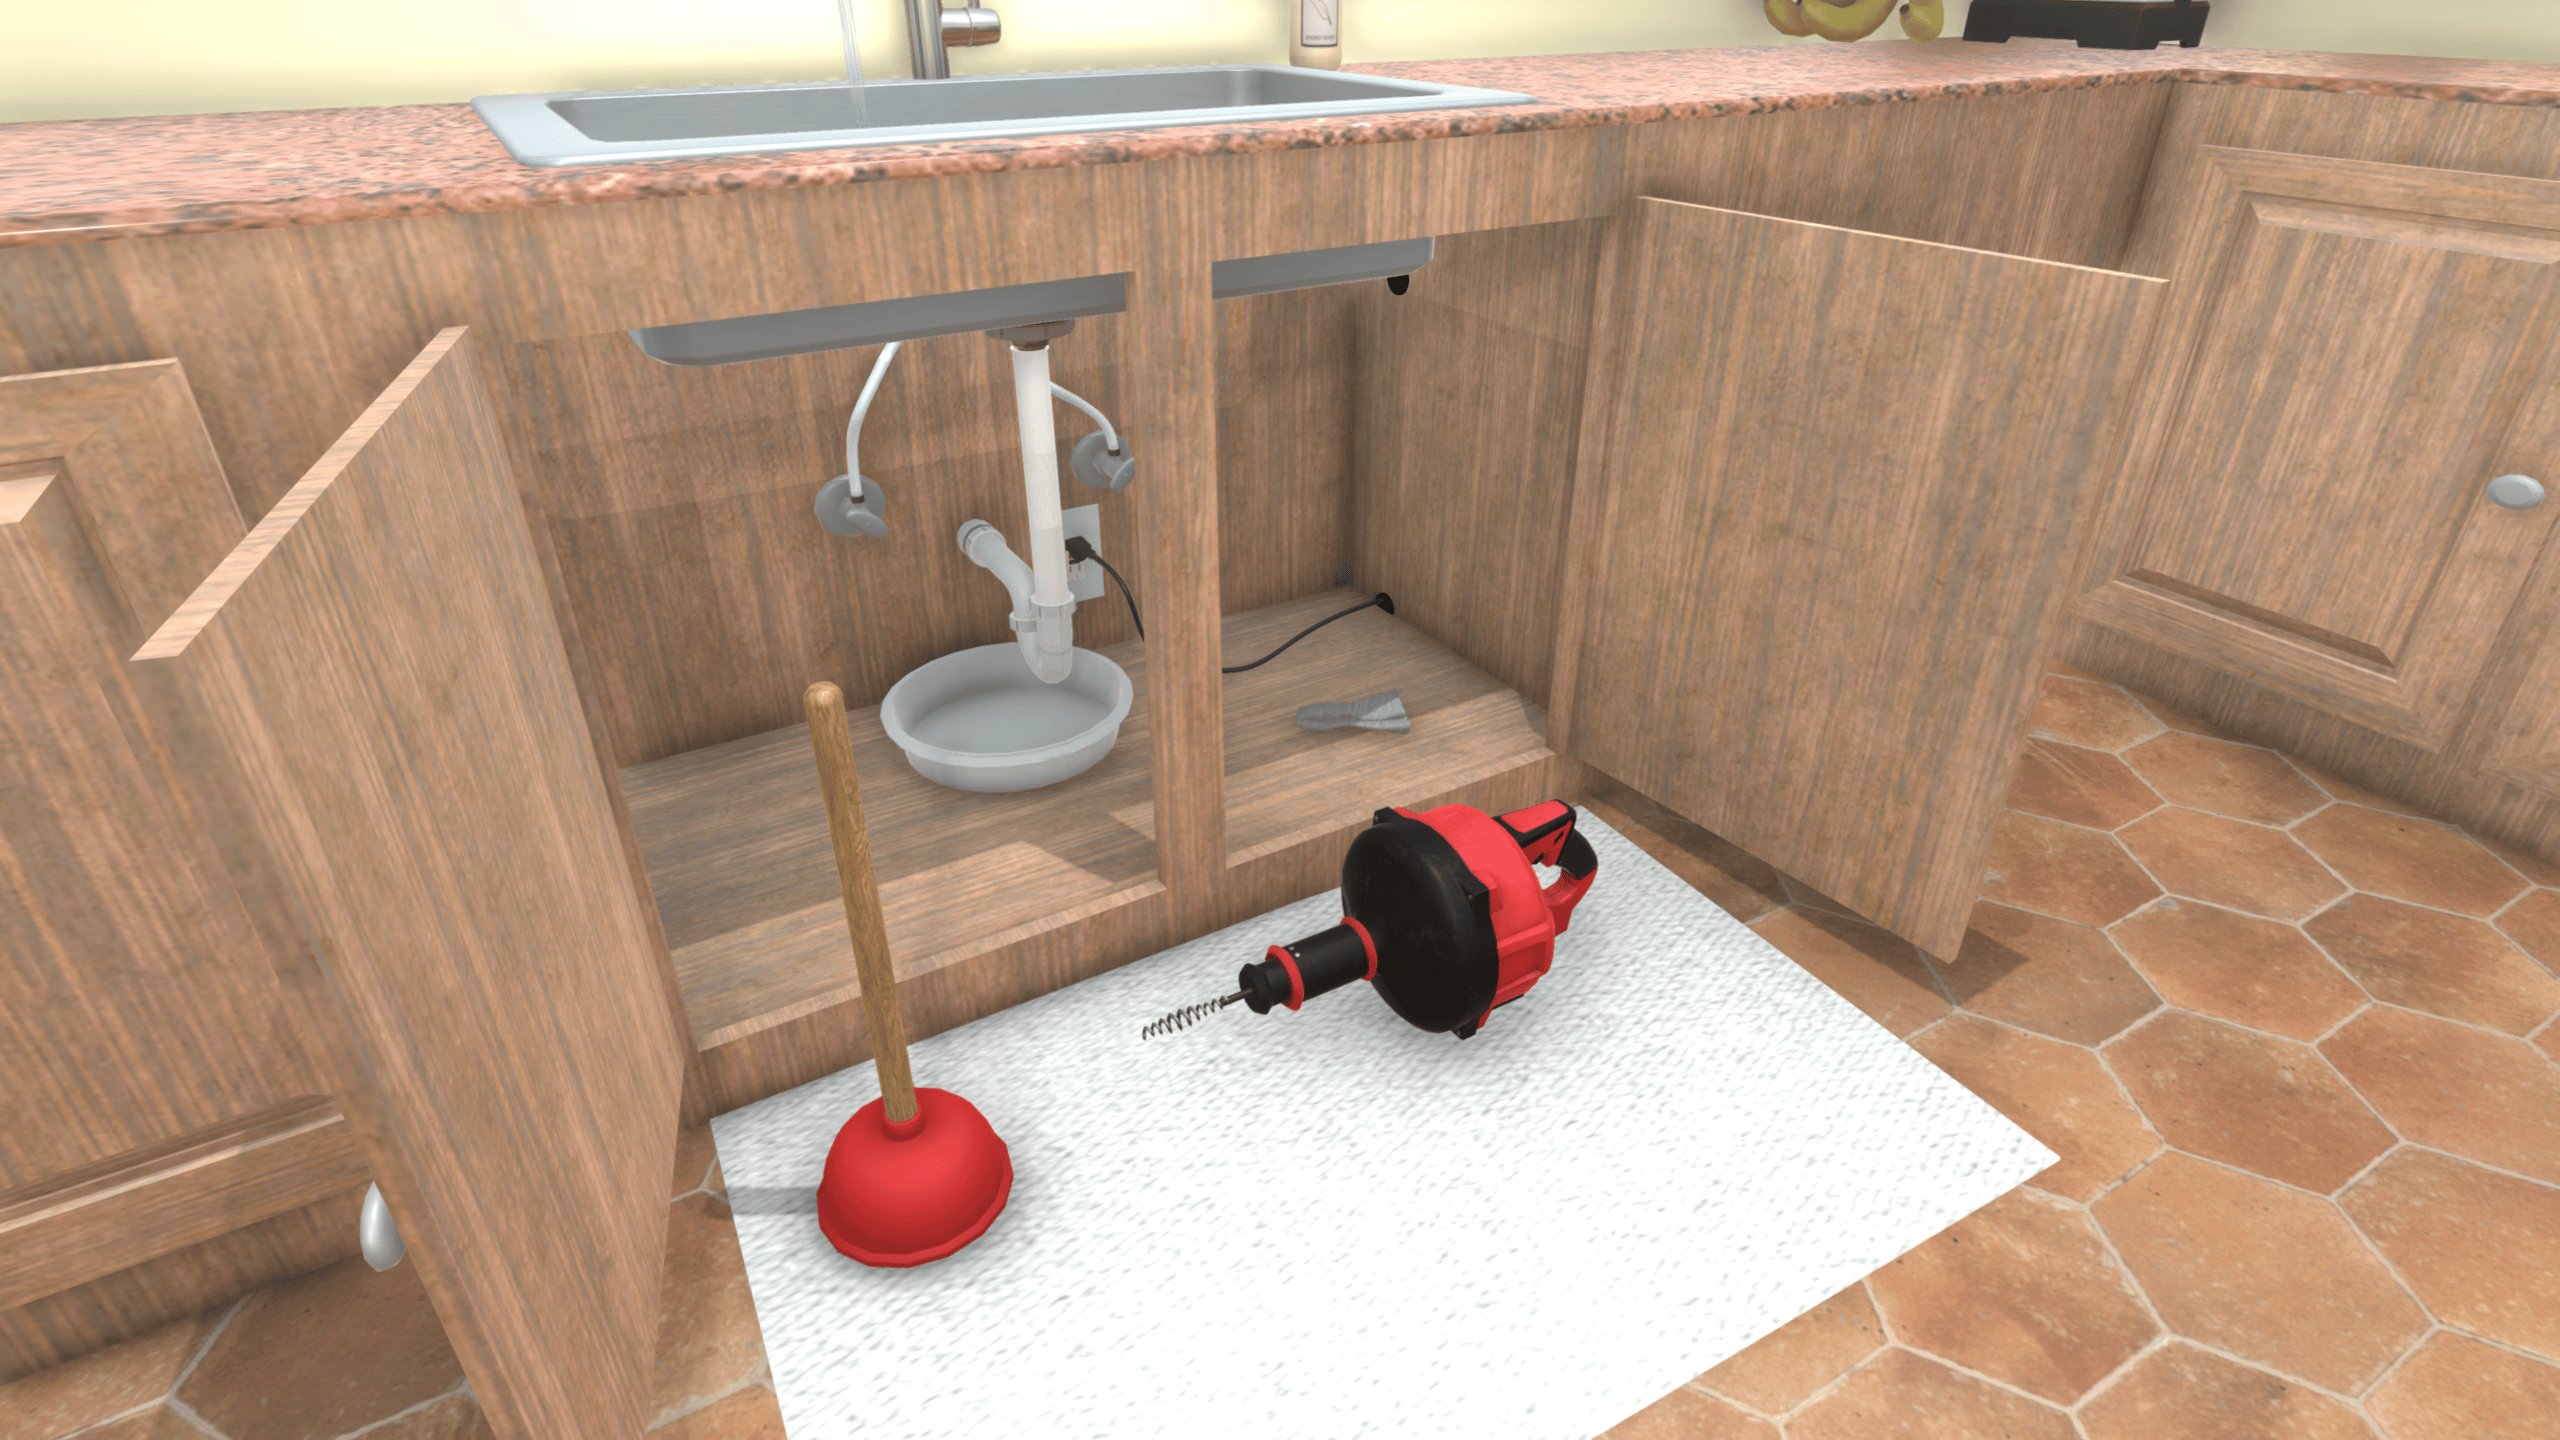 A 3D simulation of sink used for online plumbing trainig